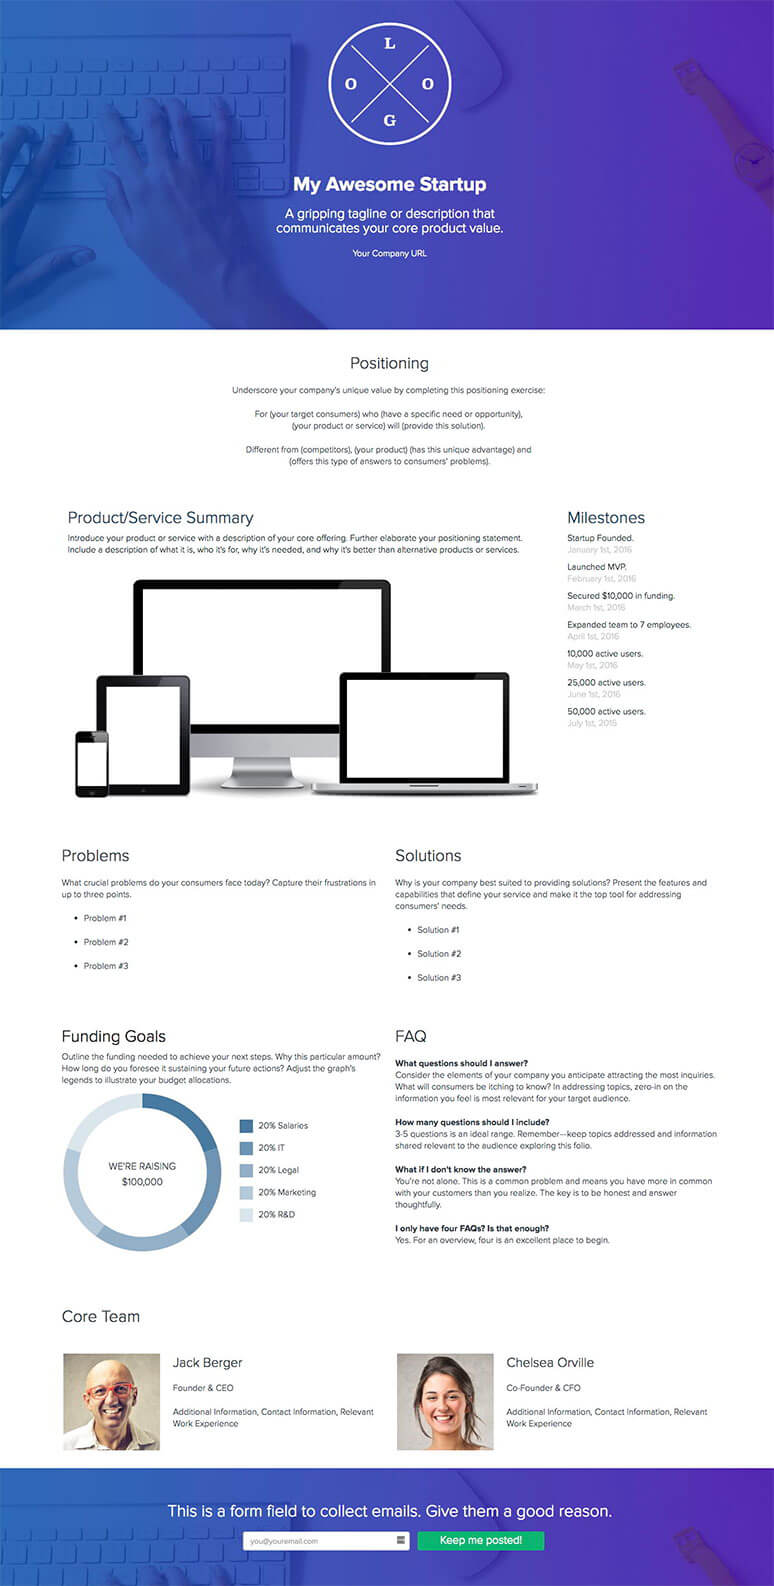 How To Create A Company One Pager (With Examples) | Xtensio With Regard To Business One Sheet Template